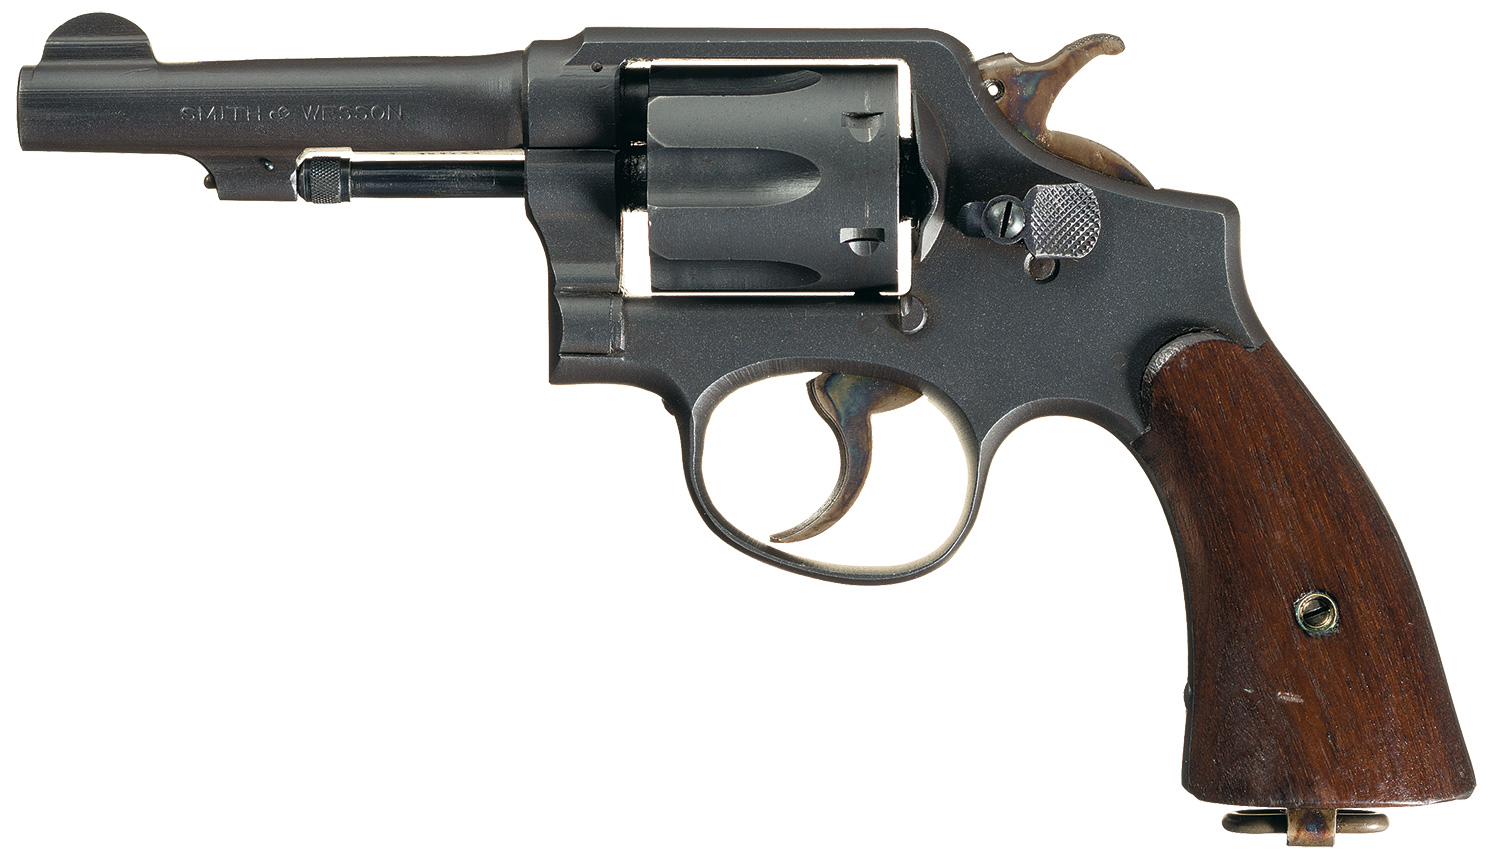 One of the Smith & Wesson Victory Models up for auction by Rock Island Auction. (Picture courtesy Rock Island Auction).